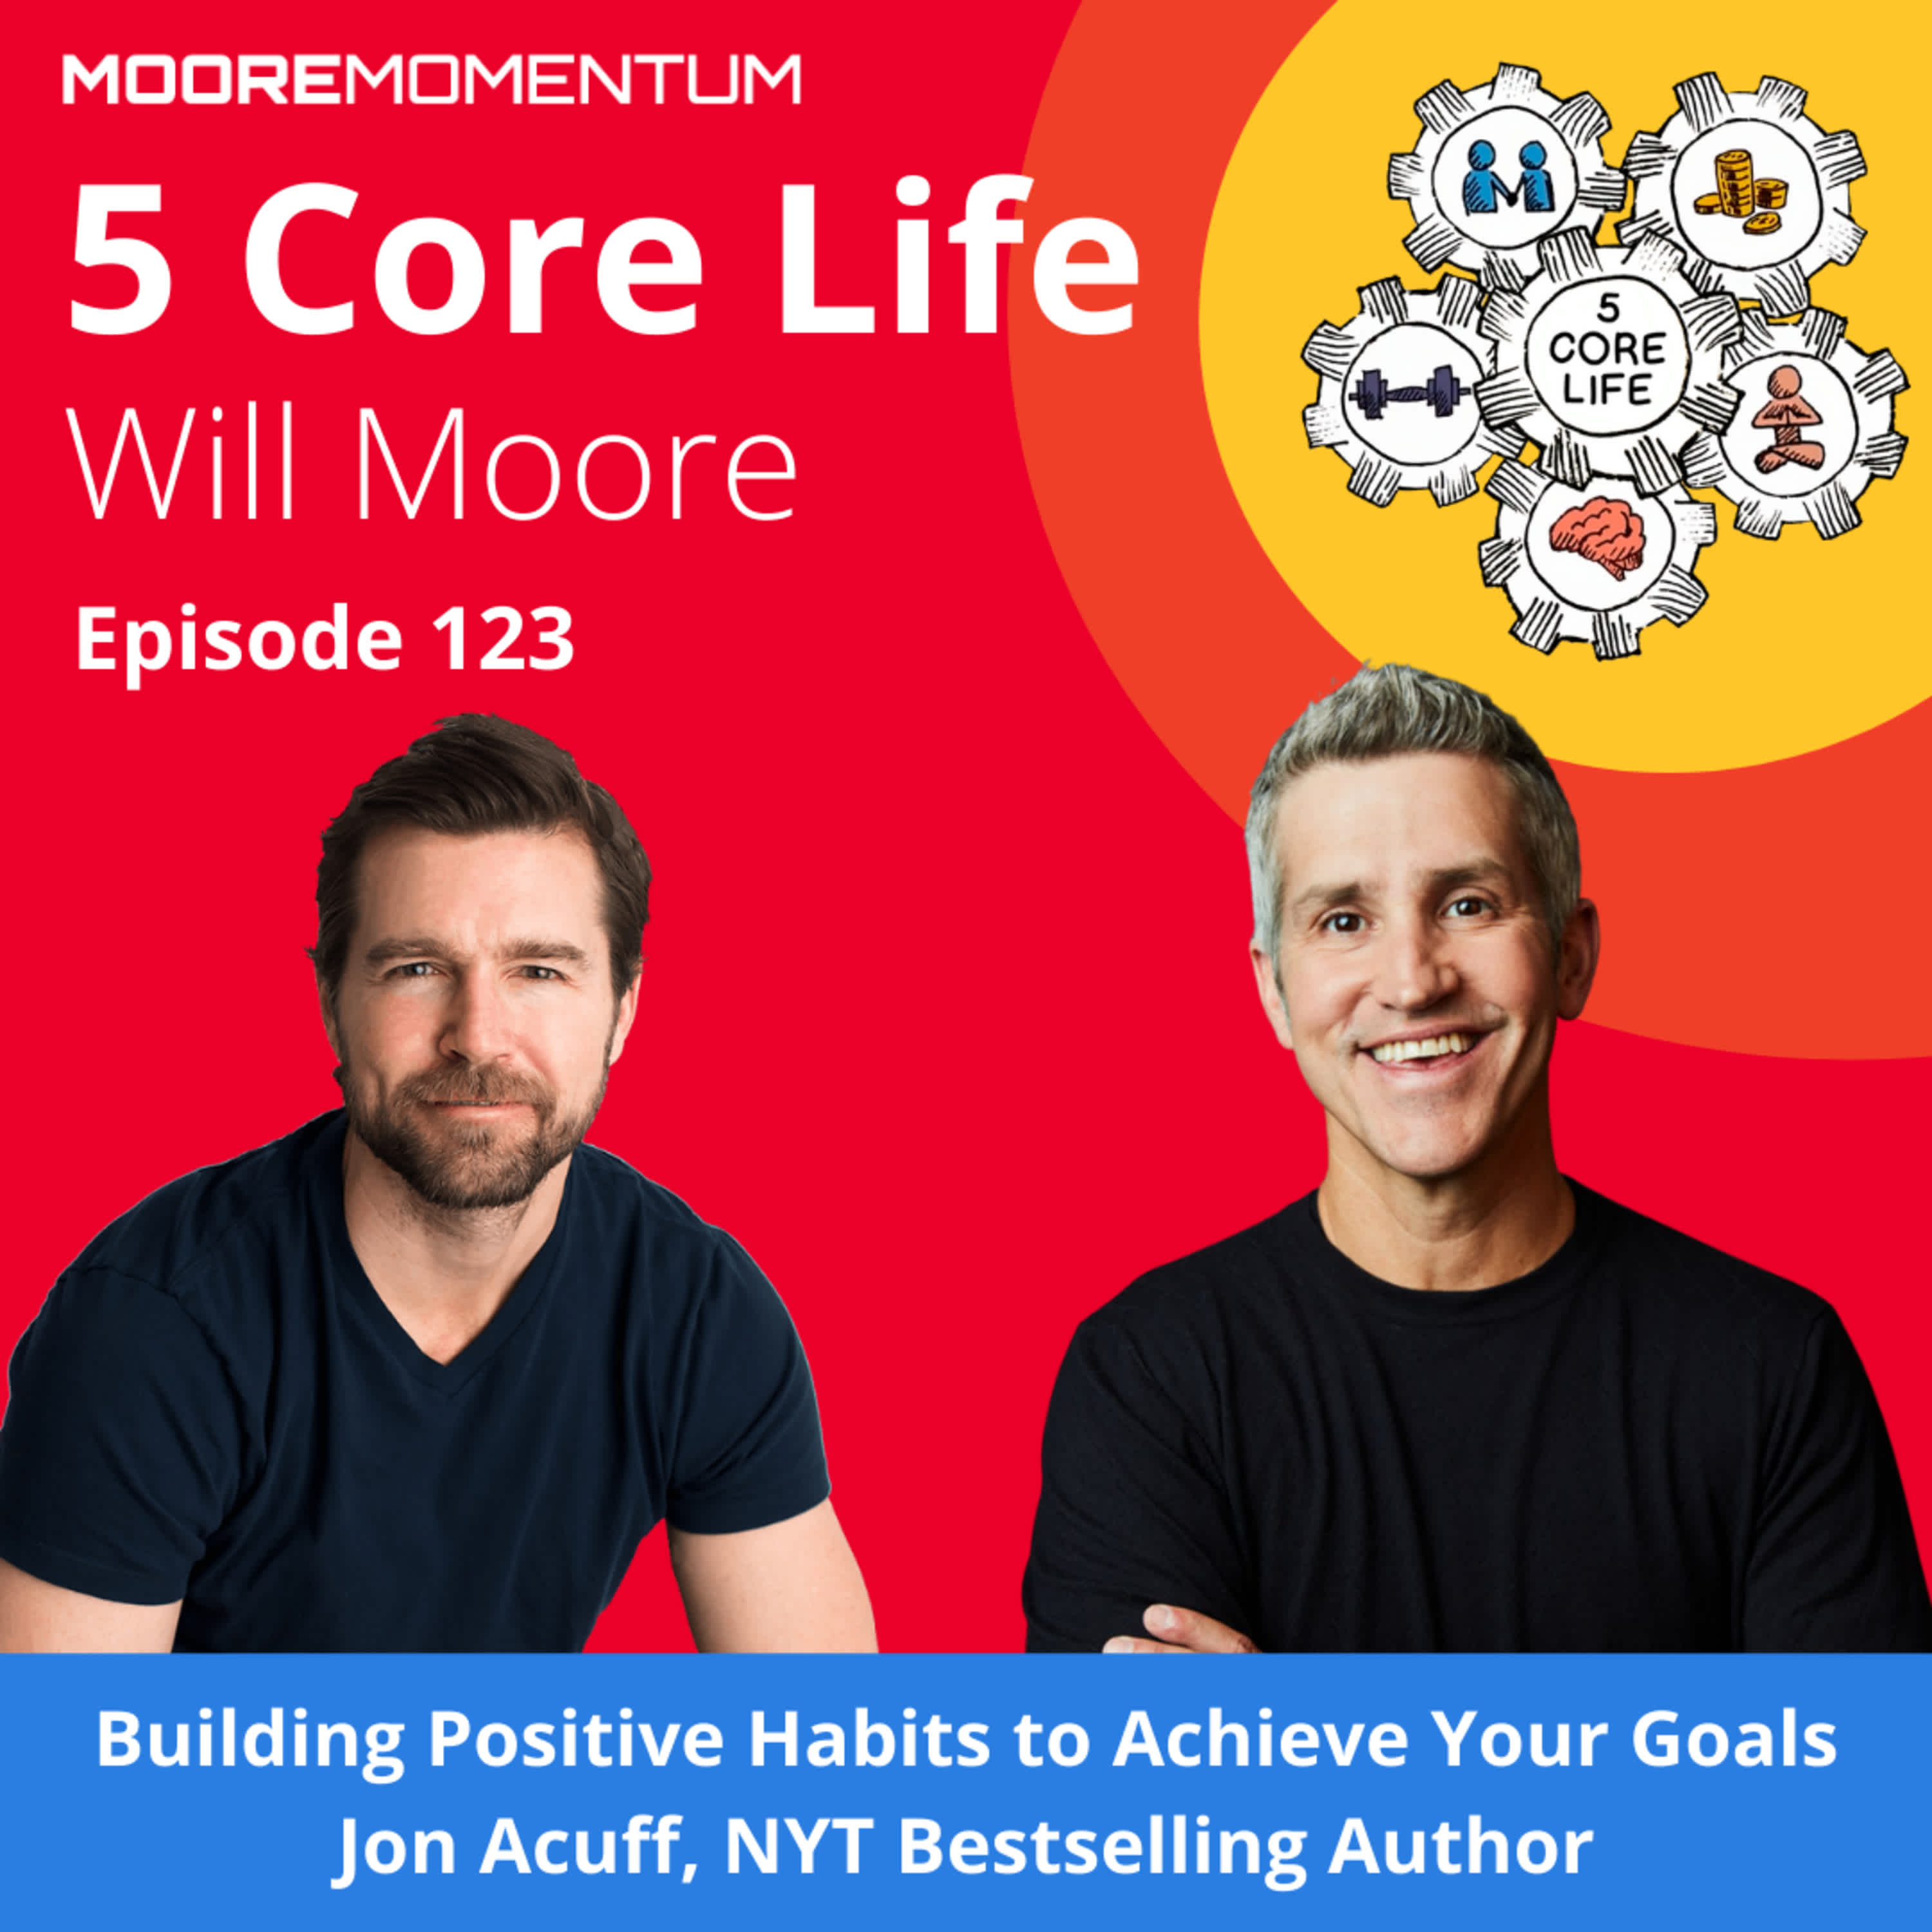 Building Positive Habits and Discipline to Achieve Your Goals | Jon Acuff, Bestselling Author